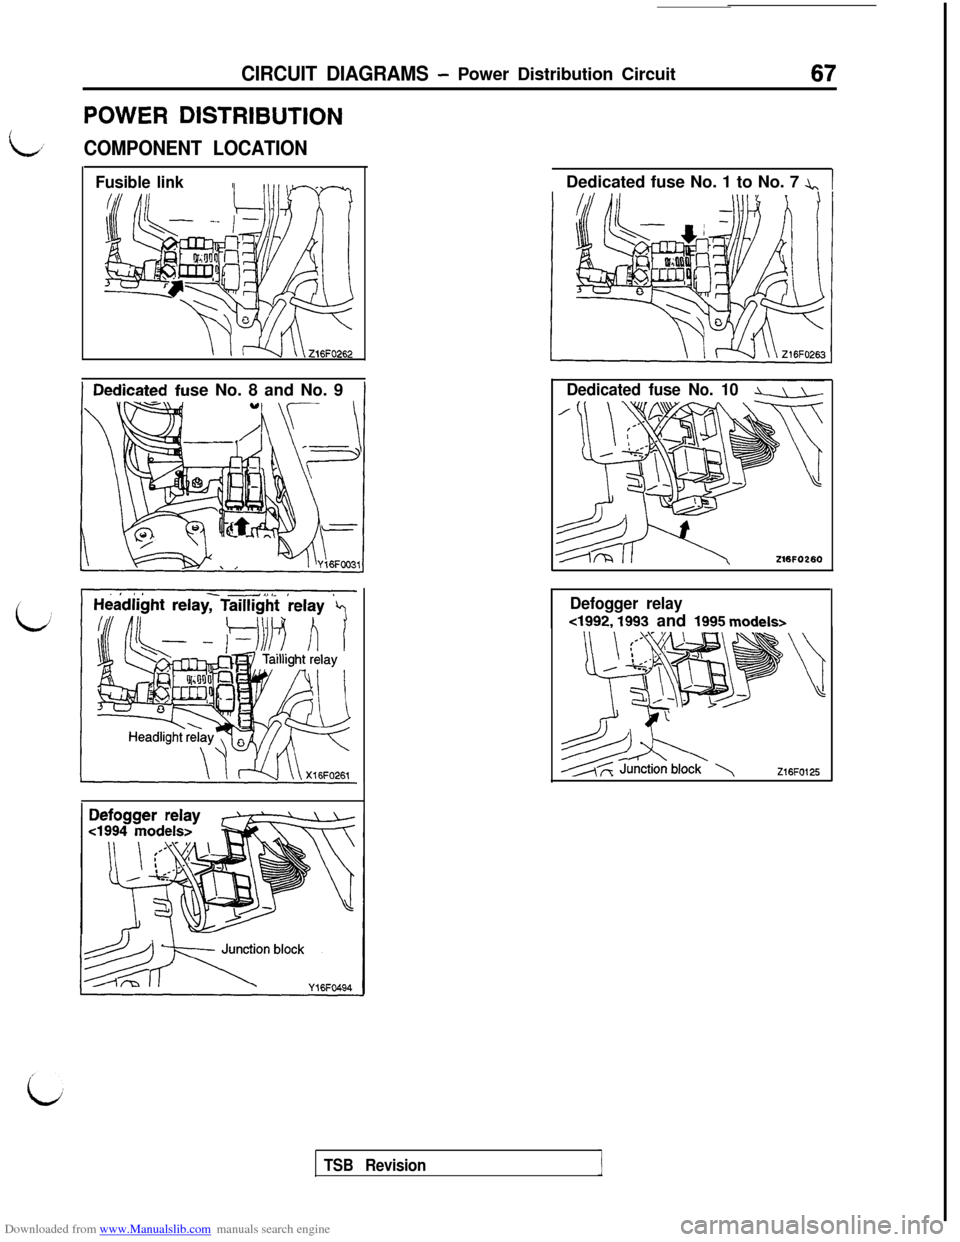 MITSUBISHI 3000GT 1993 2.G Workshop Manual Downloaded from www.Manualslib.com manuals search engine CIRCUIT DIAGRAMS - Power Distribution Circuit67
POWER DISTRIBUTION
L,’COMPONENT LOCATION
Fusible linkse No. 8 and No. 9Dedicated fuse No. 1 t